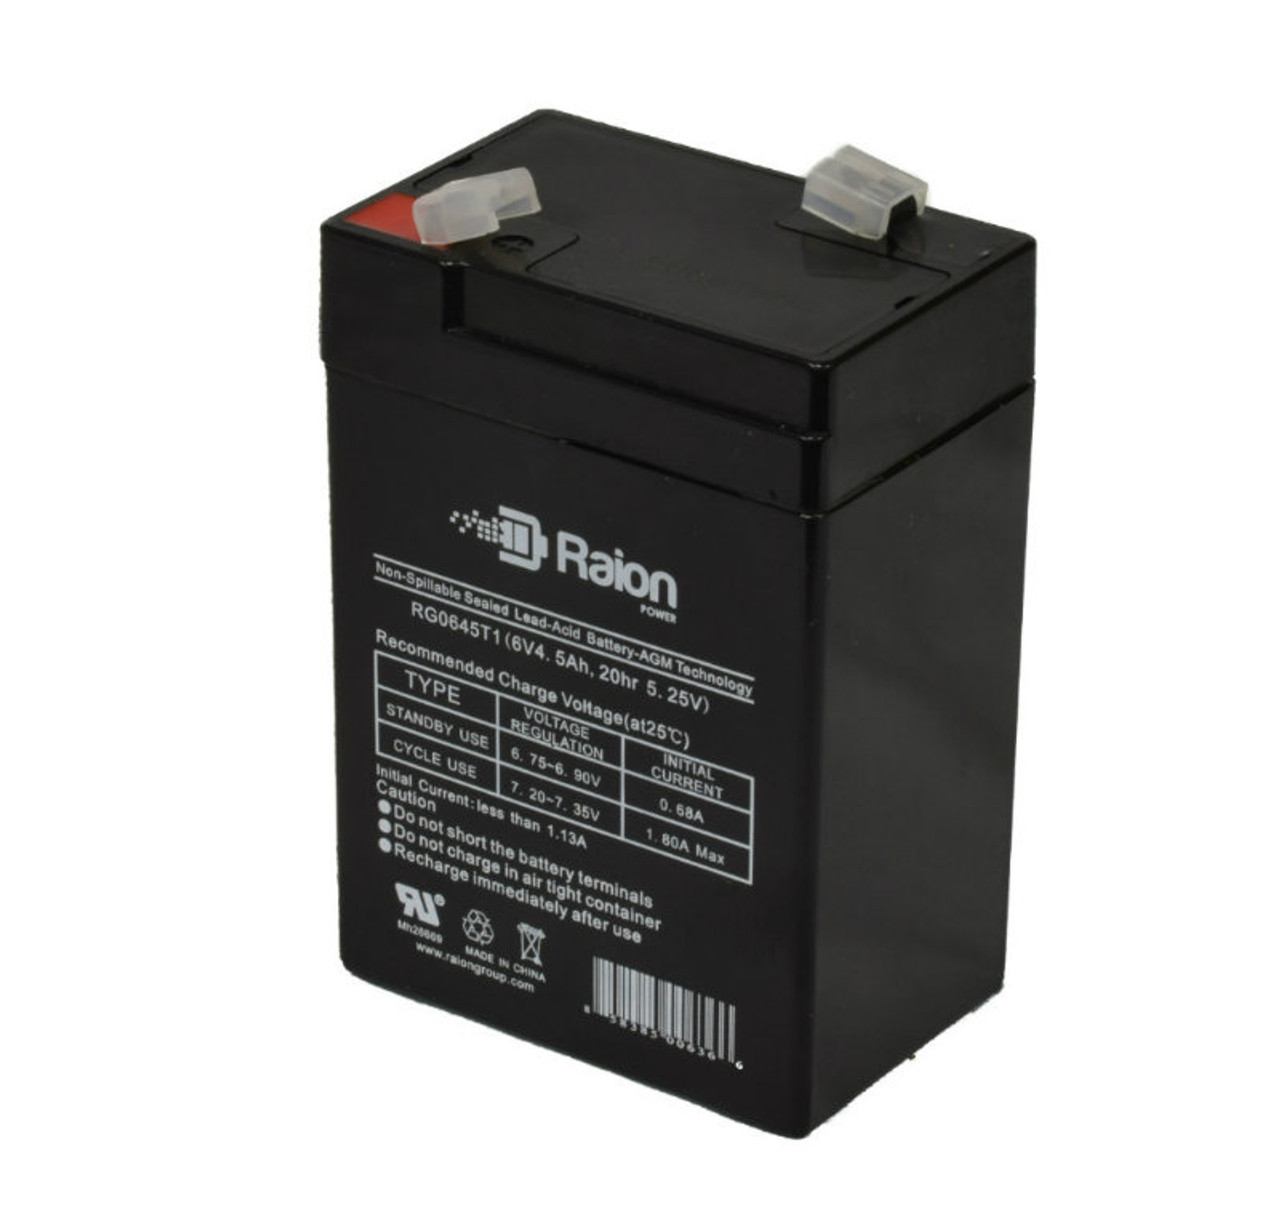 Raion Power RG0645T1 6V 4.5Ah Replacement Battery Cartridge for Union MXG-060400